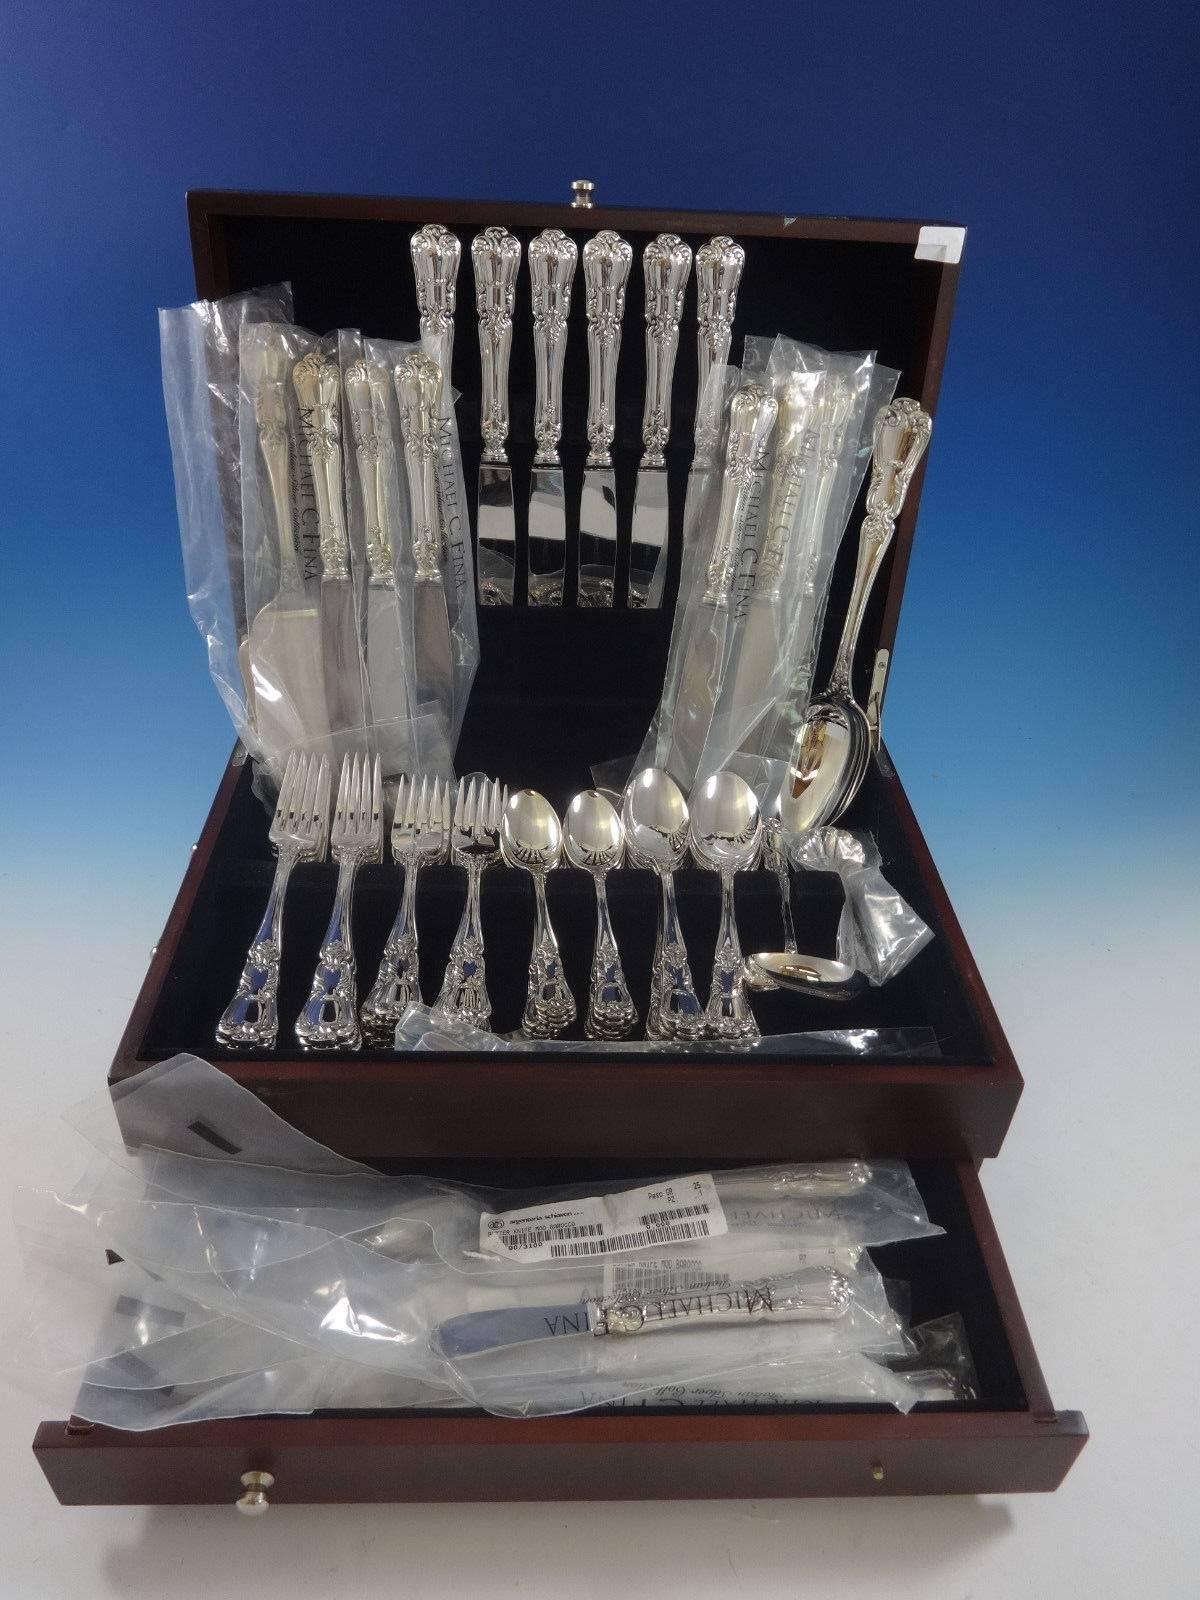 Barocco by Schiavon, Italy, retailed by Michael C Fina, Italian collection sterling silver flatware set - 77 Pieces. This set includes: 12 large dinner size knives, 10", 12 large dinner size forks, 8", 12 salad forks , 7", 12